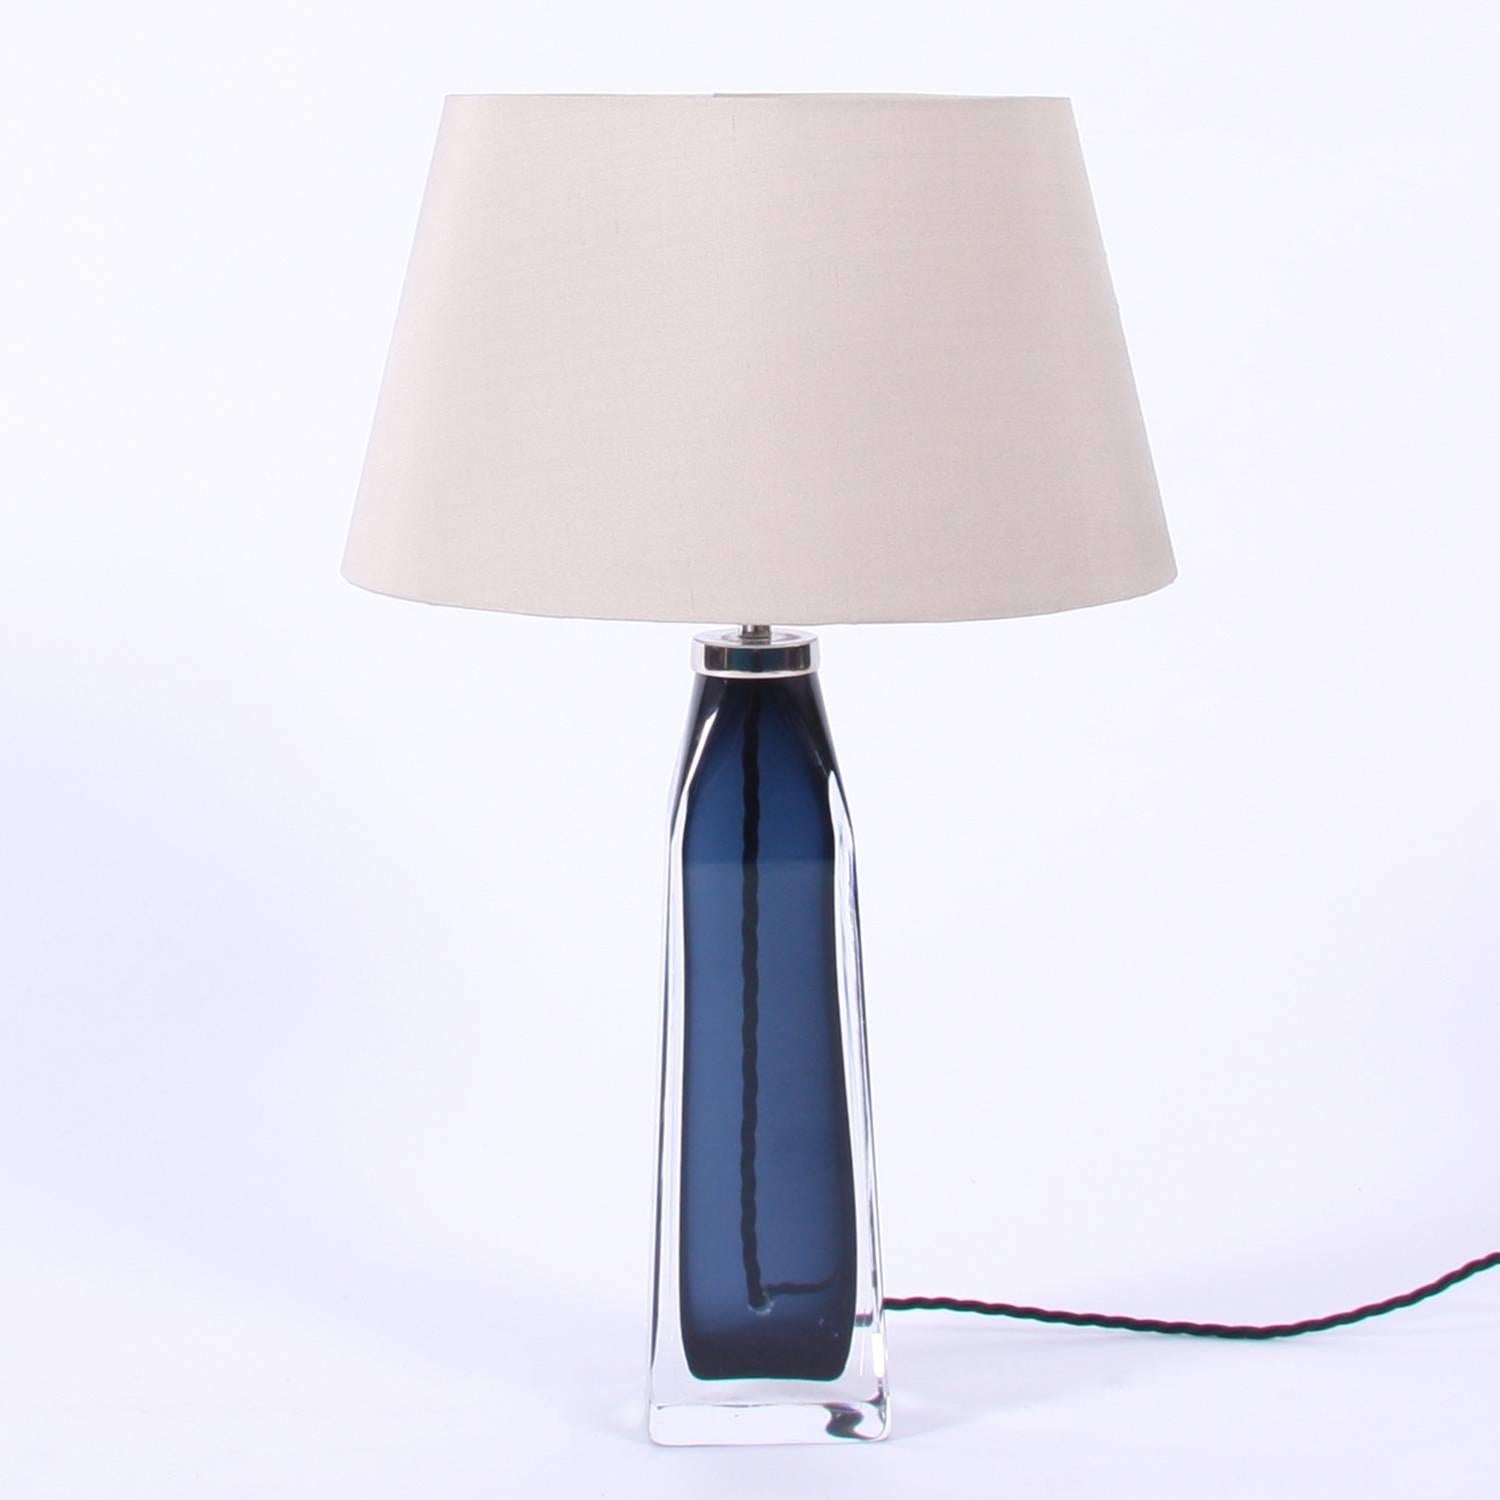 Swedish, circa 1960

A single, navy blue, Orrefors lamp with rectangular base. Stamped with the maker's name. 

Pictured with a bespoke, handmade, silk shade. 

Rewired and PAT tested.